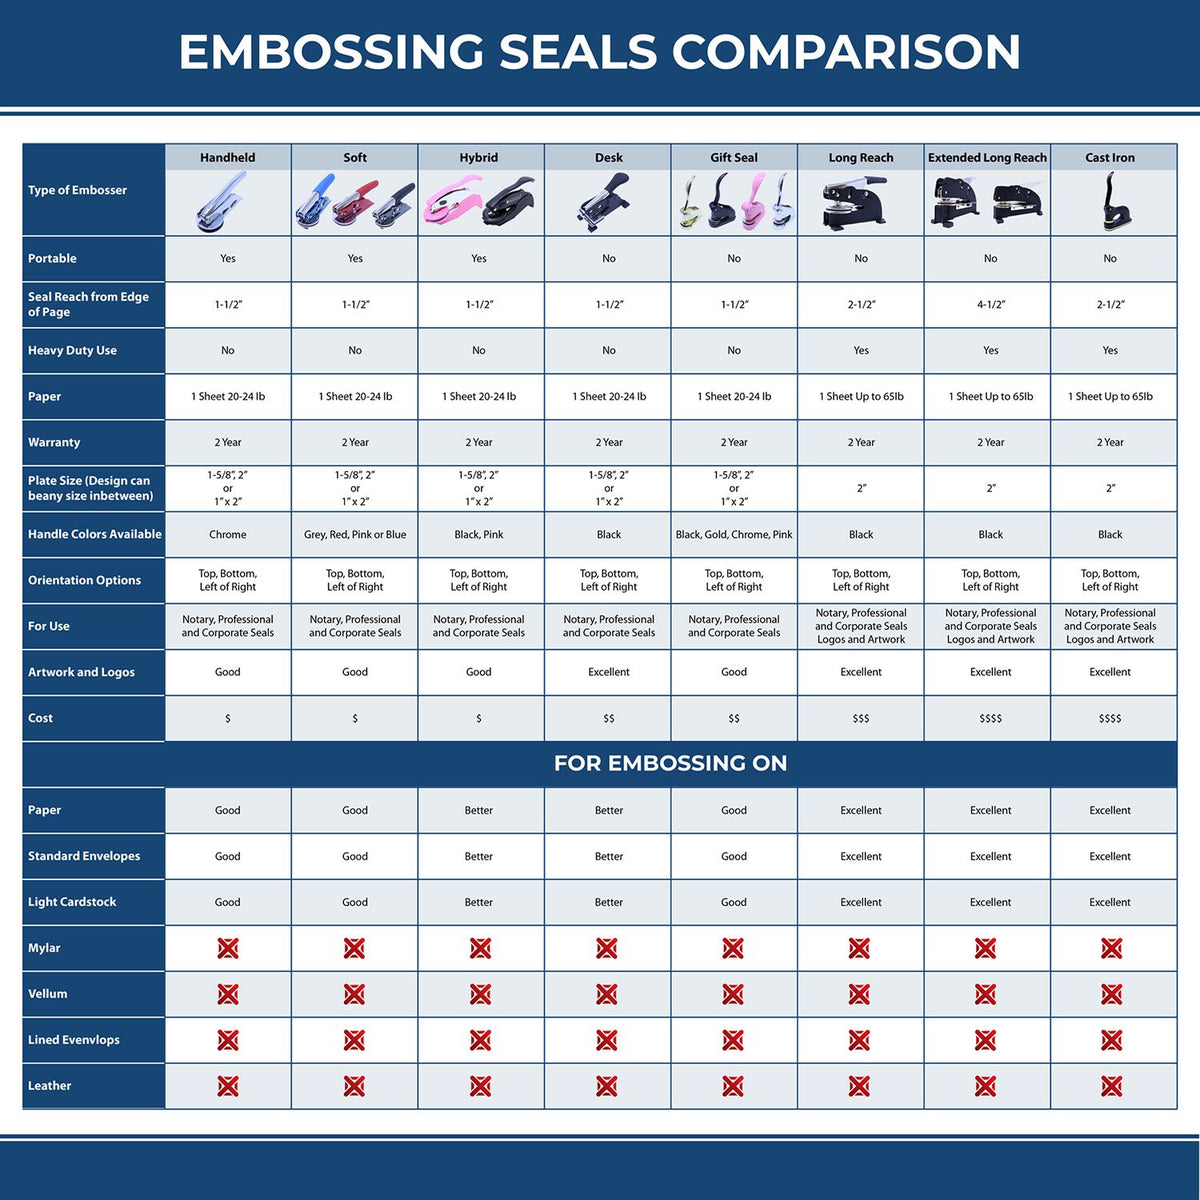 A comparison chart for the different types of mount models available for the Hybrid Kansas Geologist Seal